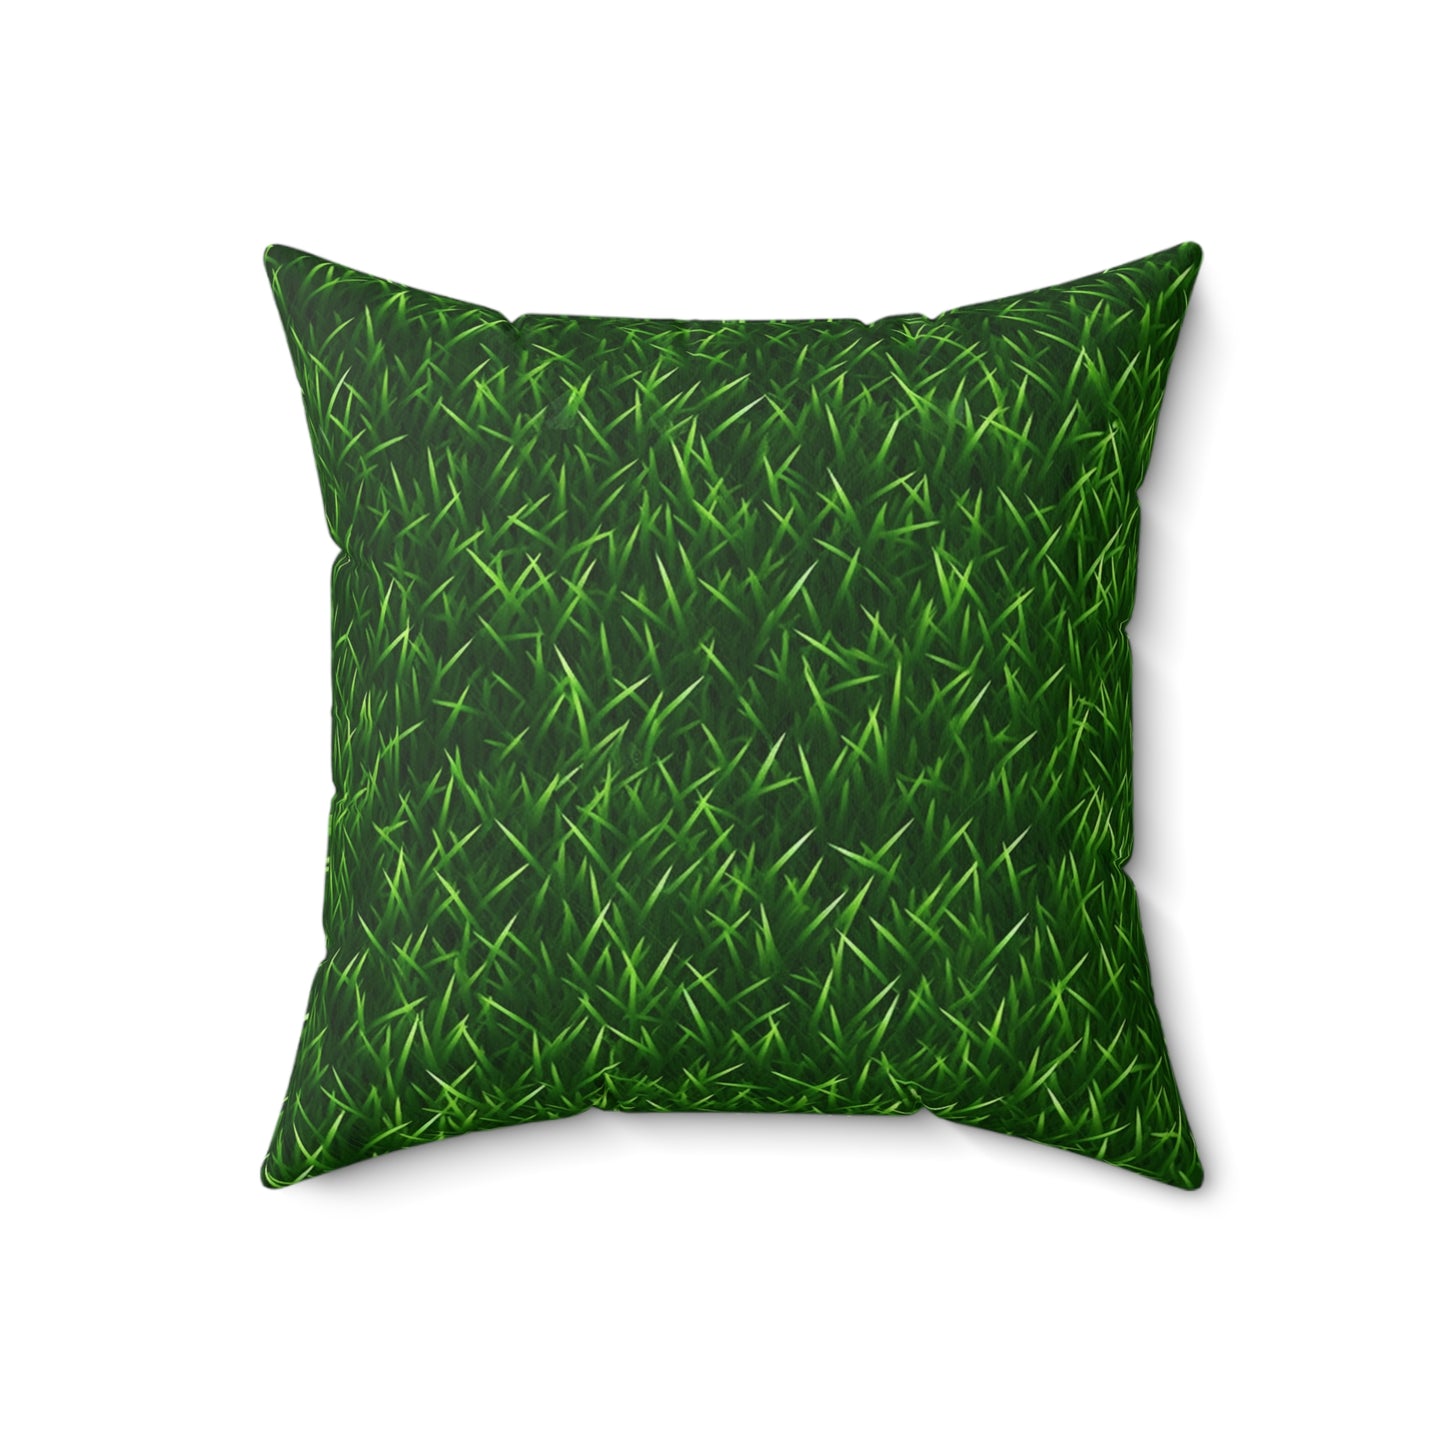 Touch Grass Indoor Style Outdoor Green Artificial Grass Turf - Spun Polyester Square Pillow